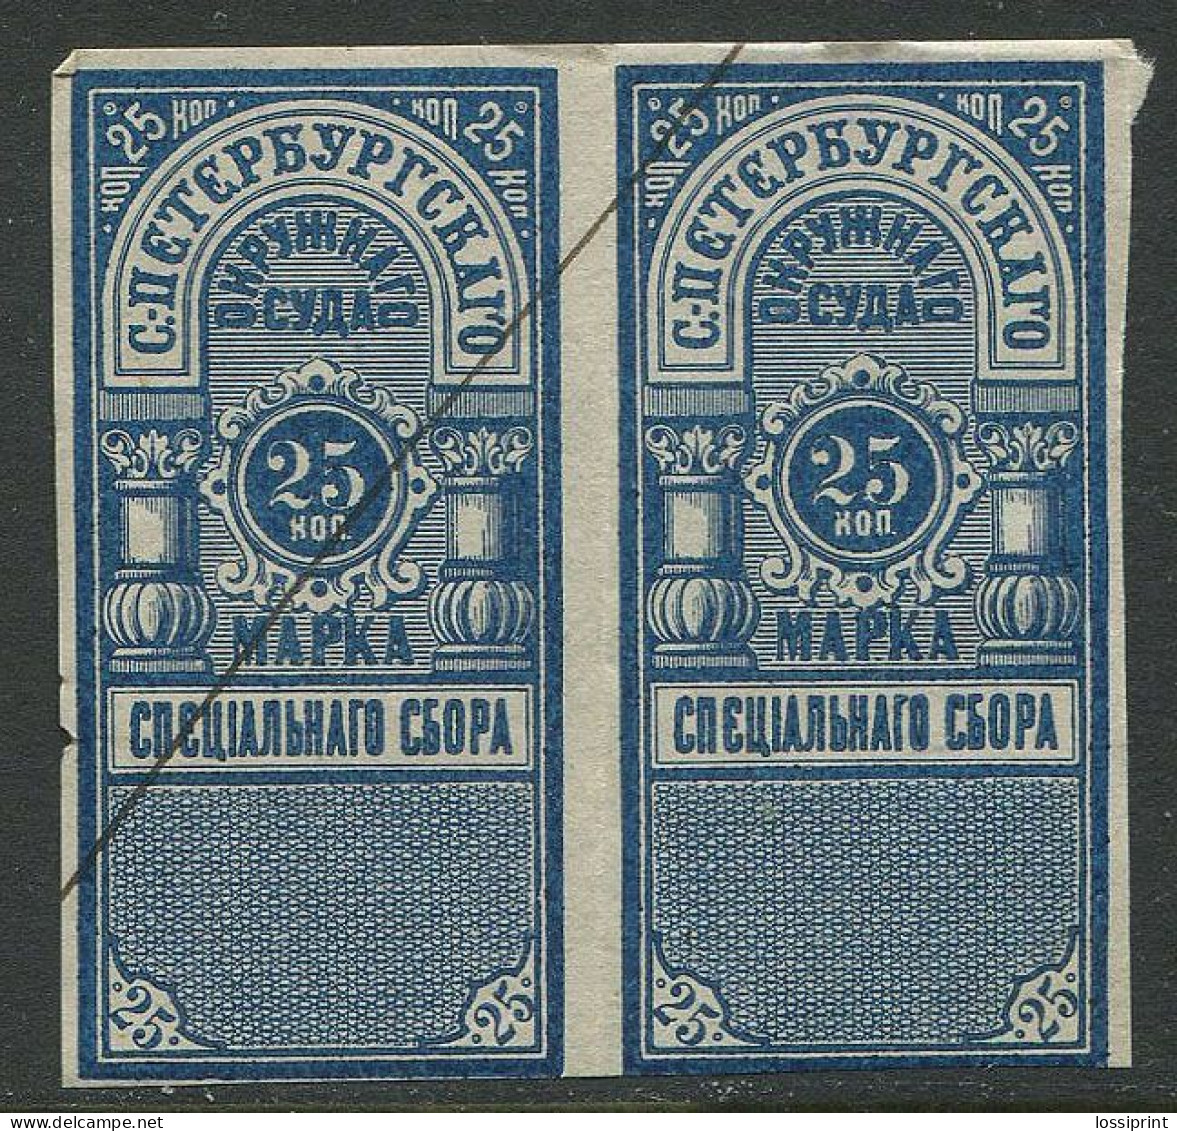 Russia:Used Revenue Stamps 25 Kopeika, Pair, Pre 1917 - Revenue Stamps